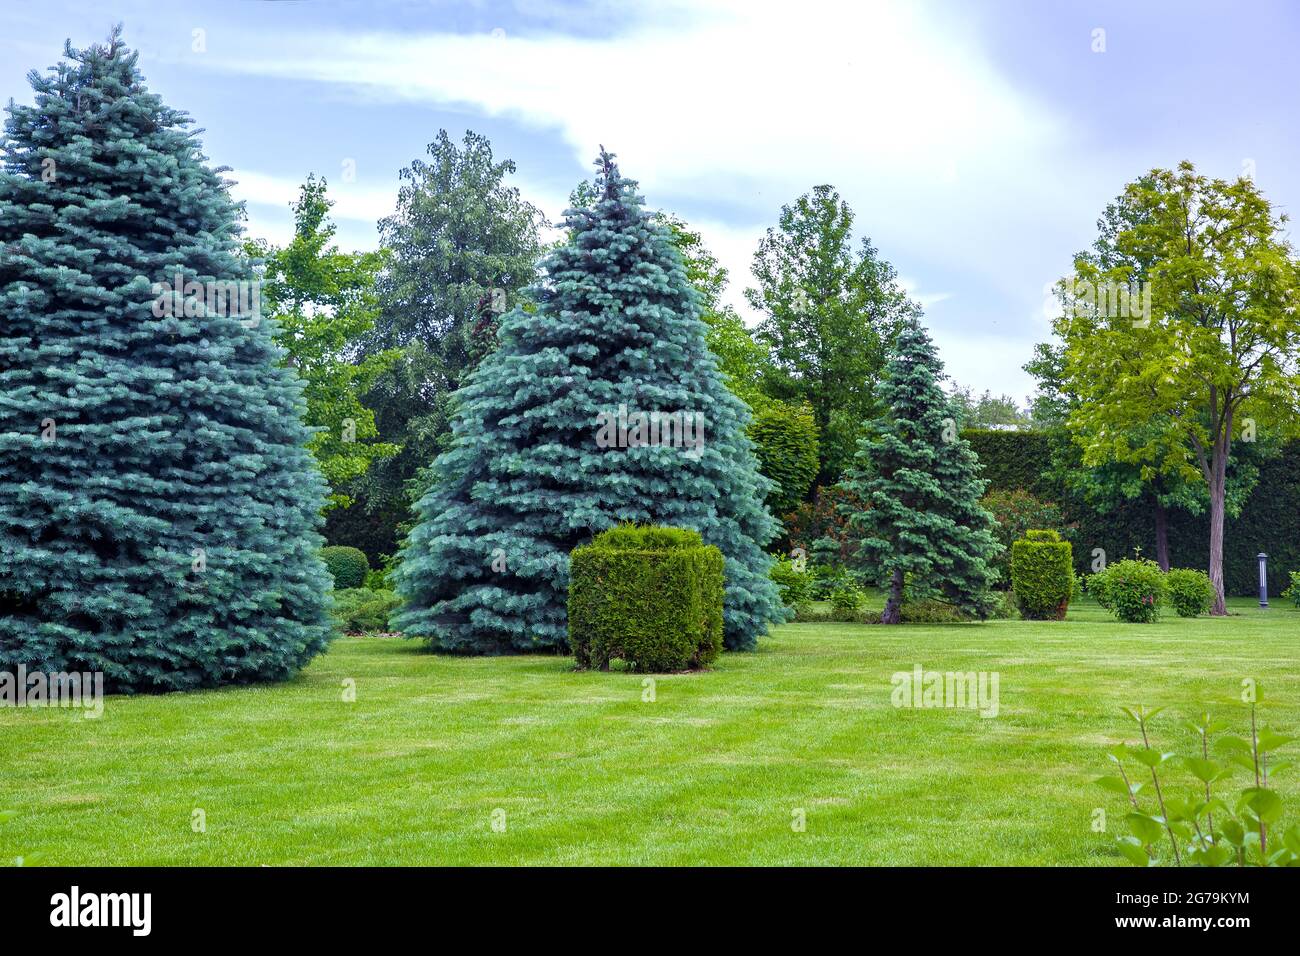 coniferous trees on a meadow with a lawn and a trimmed bush in a park with deciduous and pine trees, summer green nature landscape with clouds in the Stock Photo